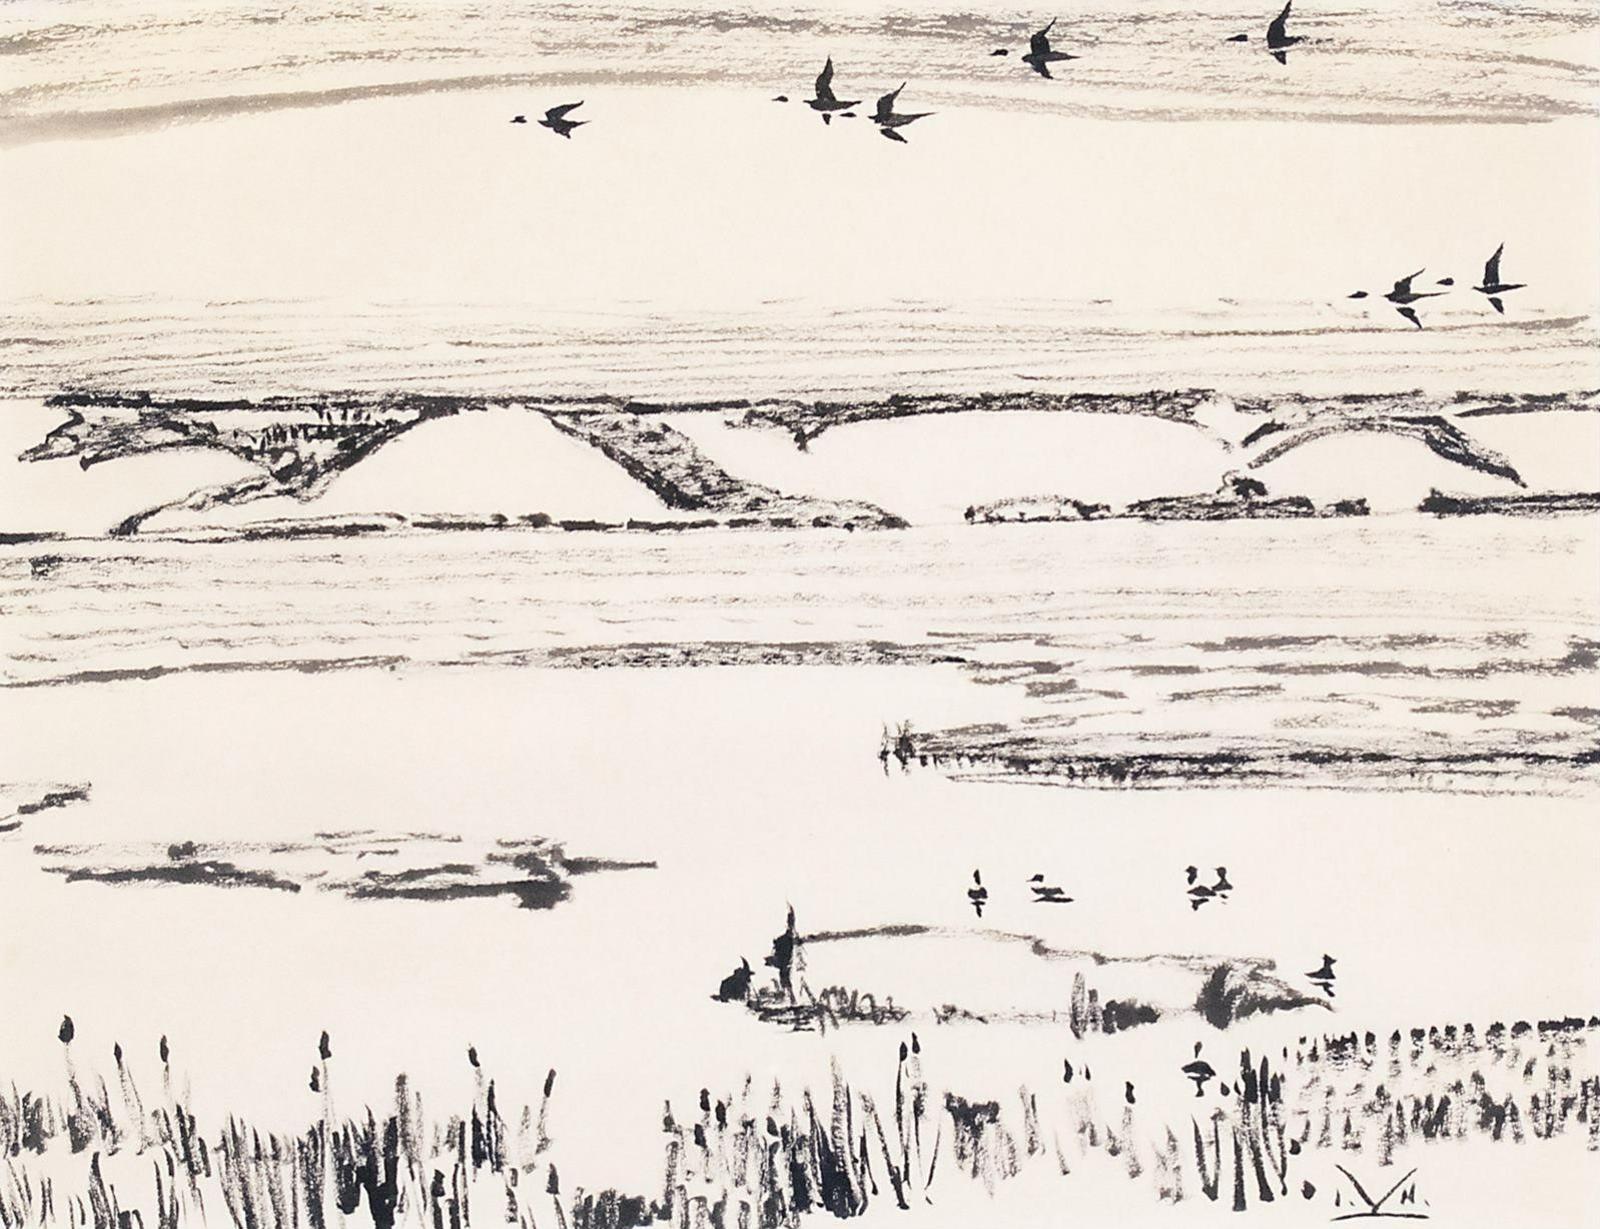 Illingworth Holey (Buck) Kerr (1905-1989) - Geese Flying Over A Marshy River Valley